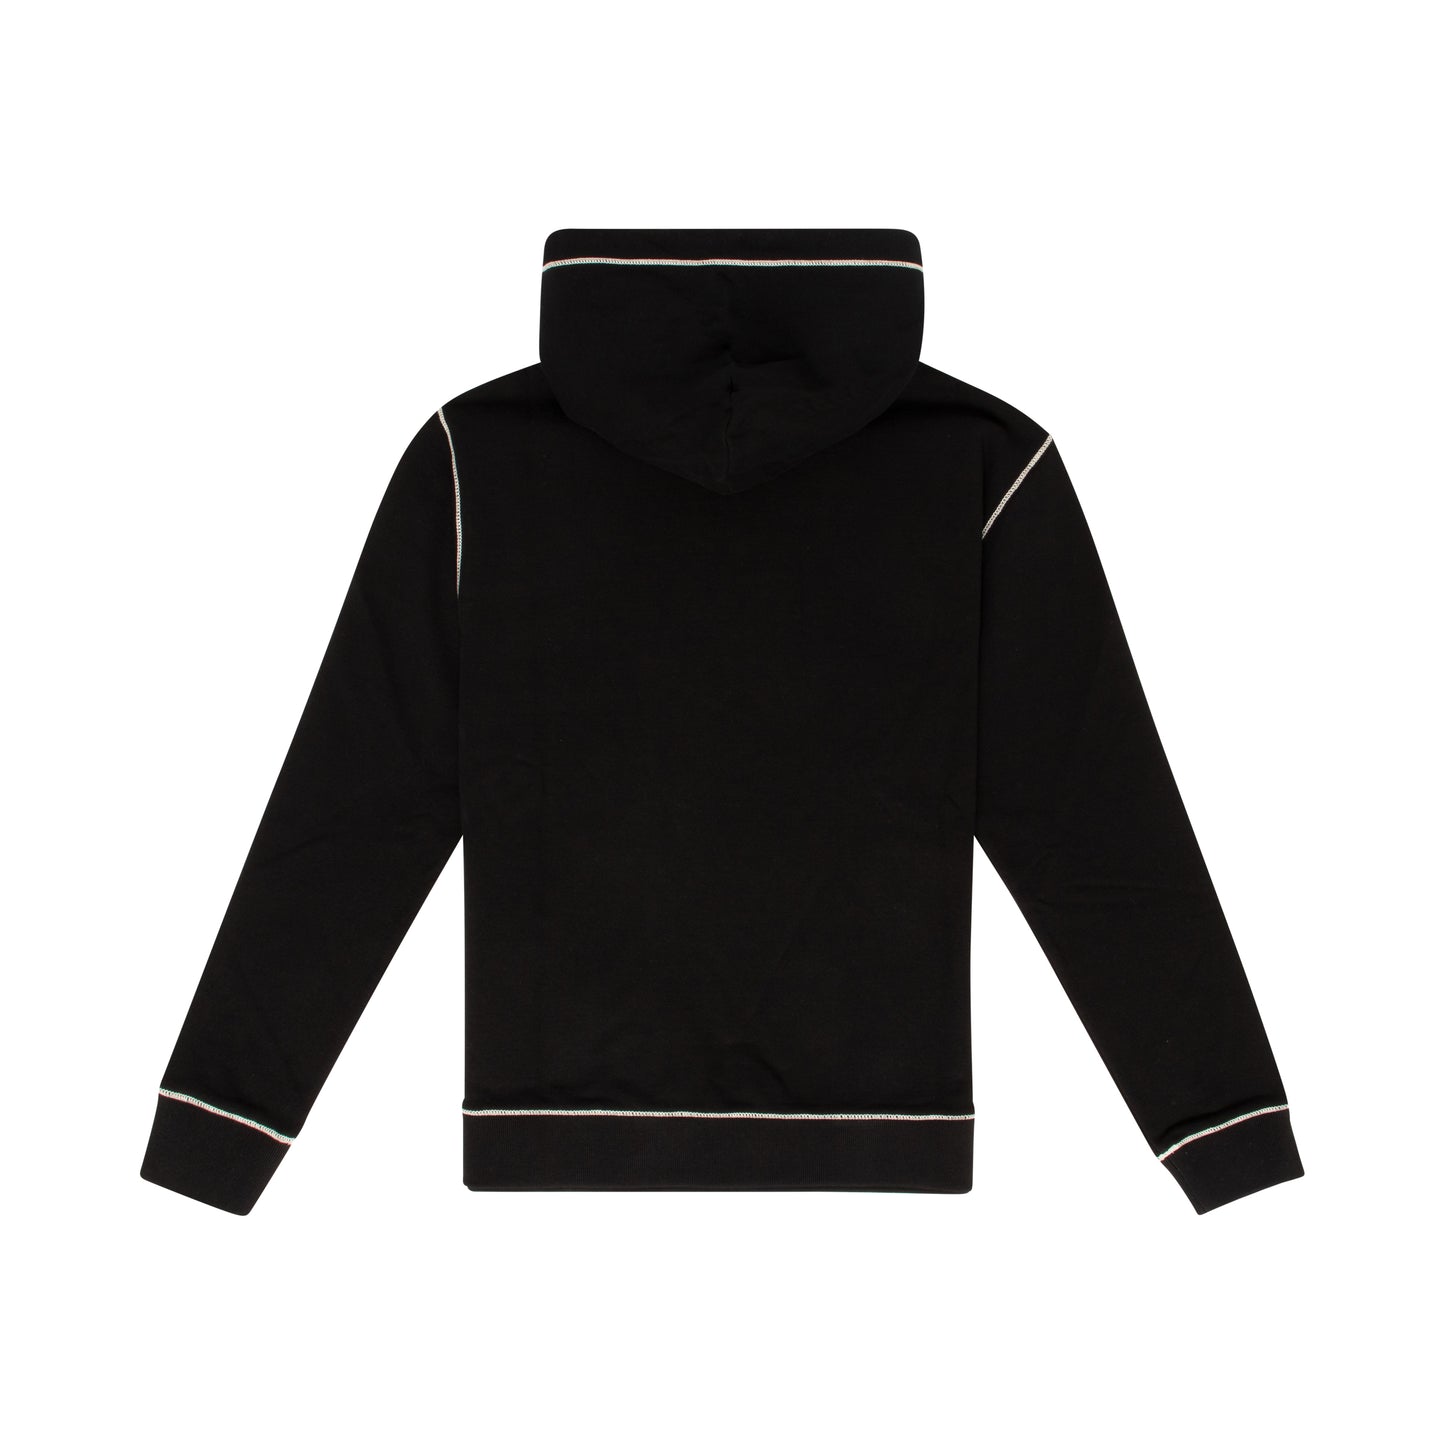 Anagram Embroidered Contrast Hoodie in Black